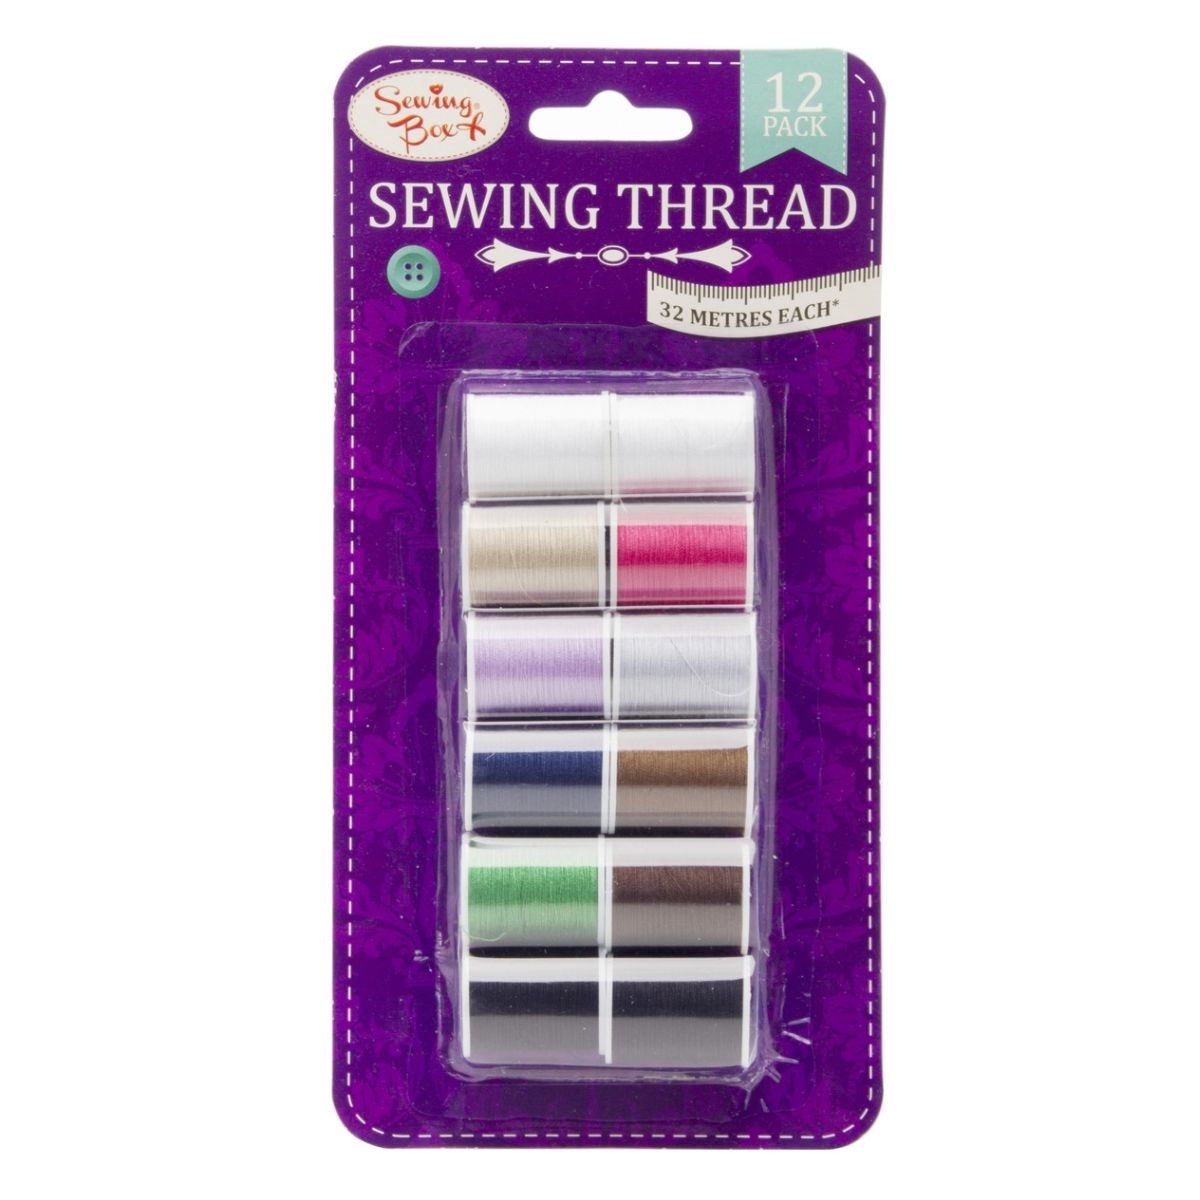 A Sewing Box - Coloured Sewing Threads - 12pcs, each 32 metres in length, in retail packaging.